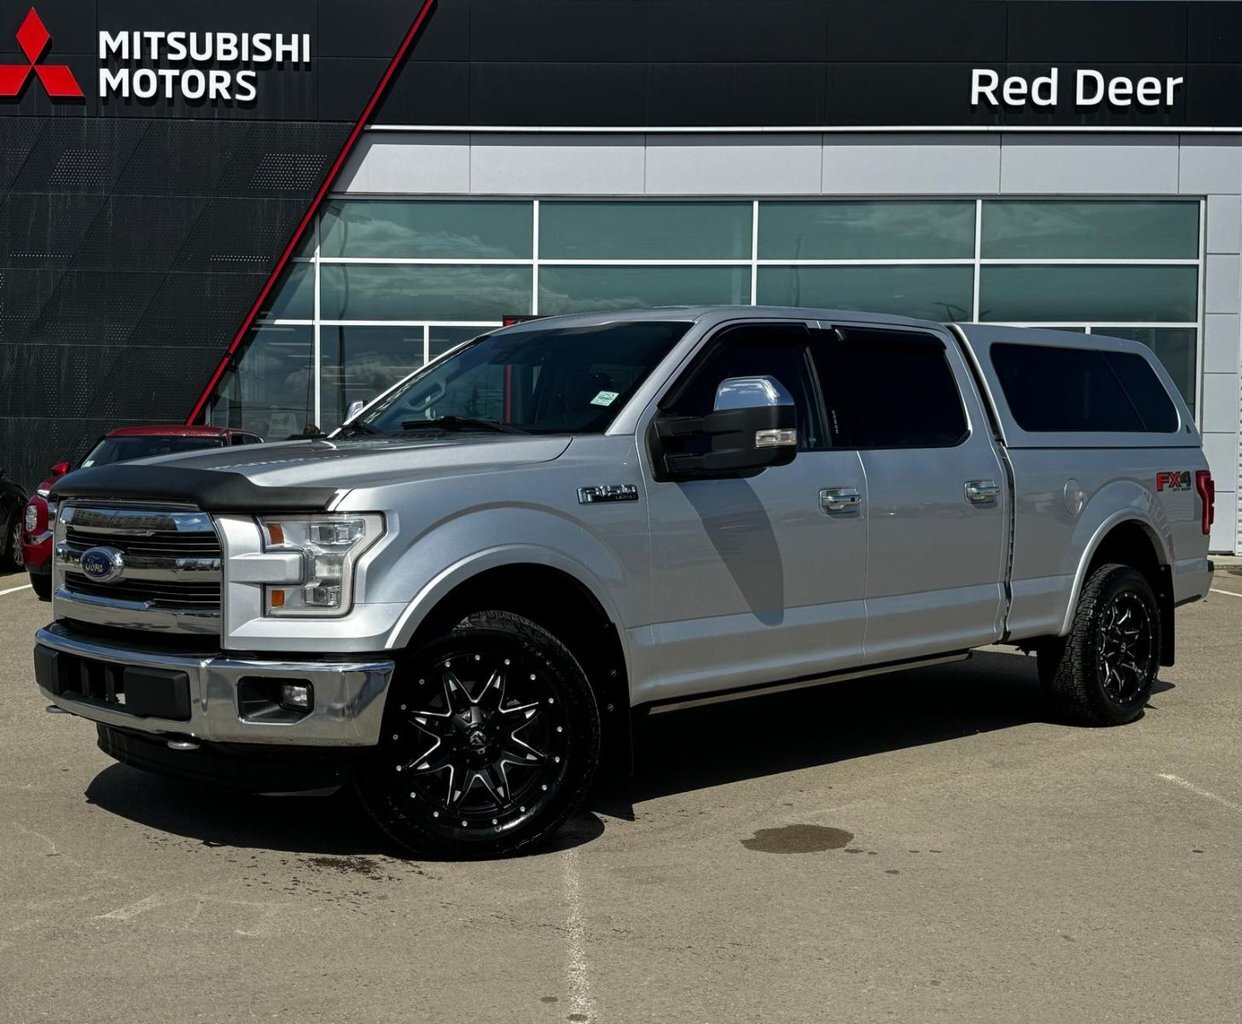 2015 Ford F-150 Lariat One owner, Locally owned, Roush air intake,